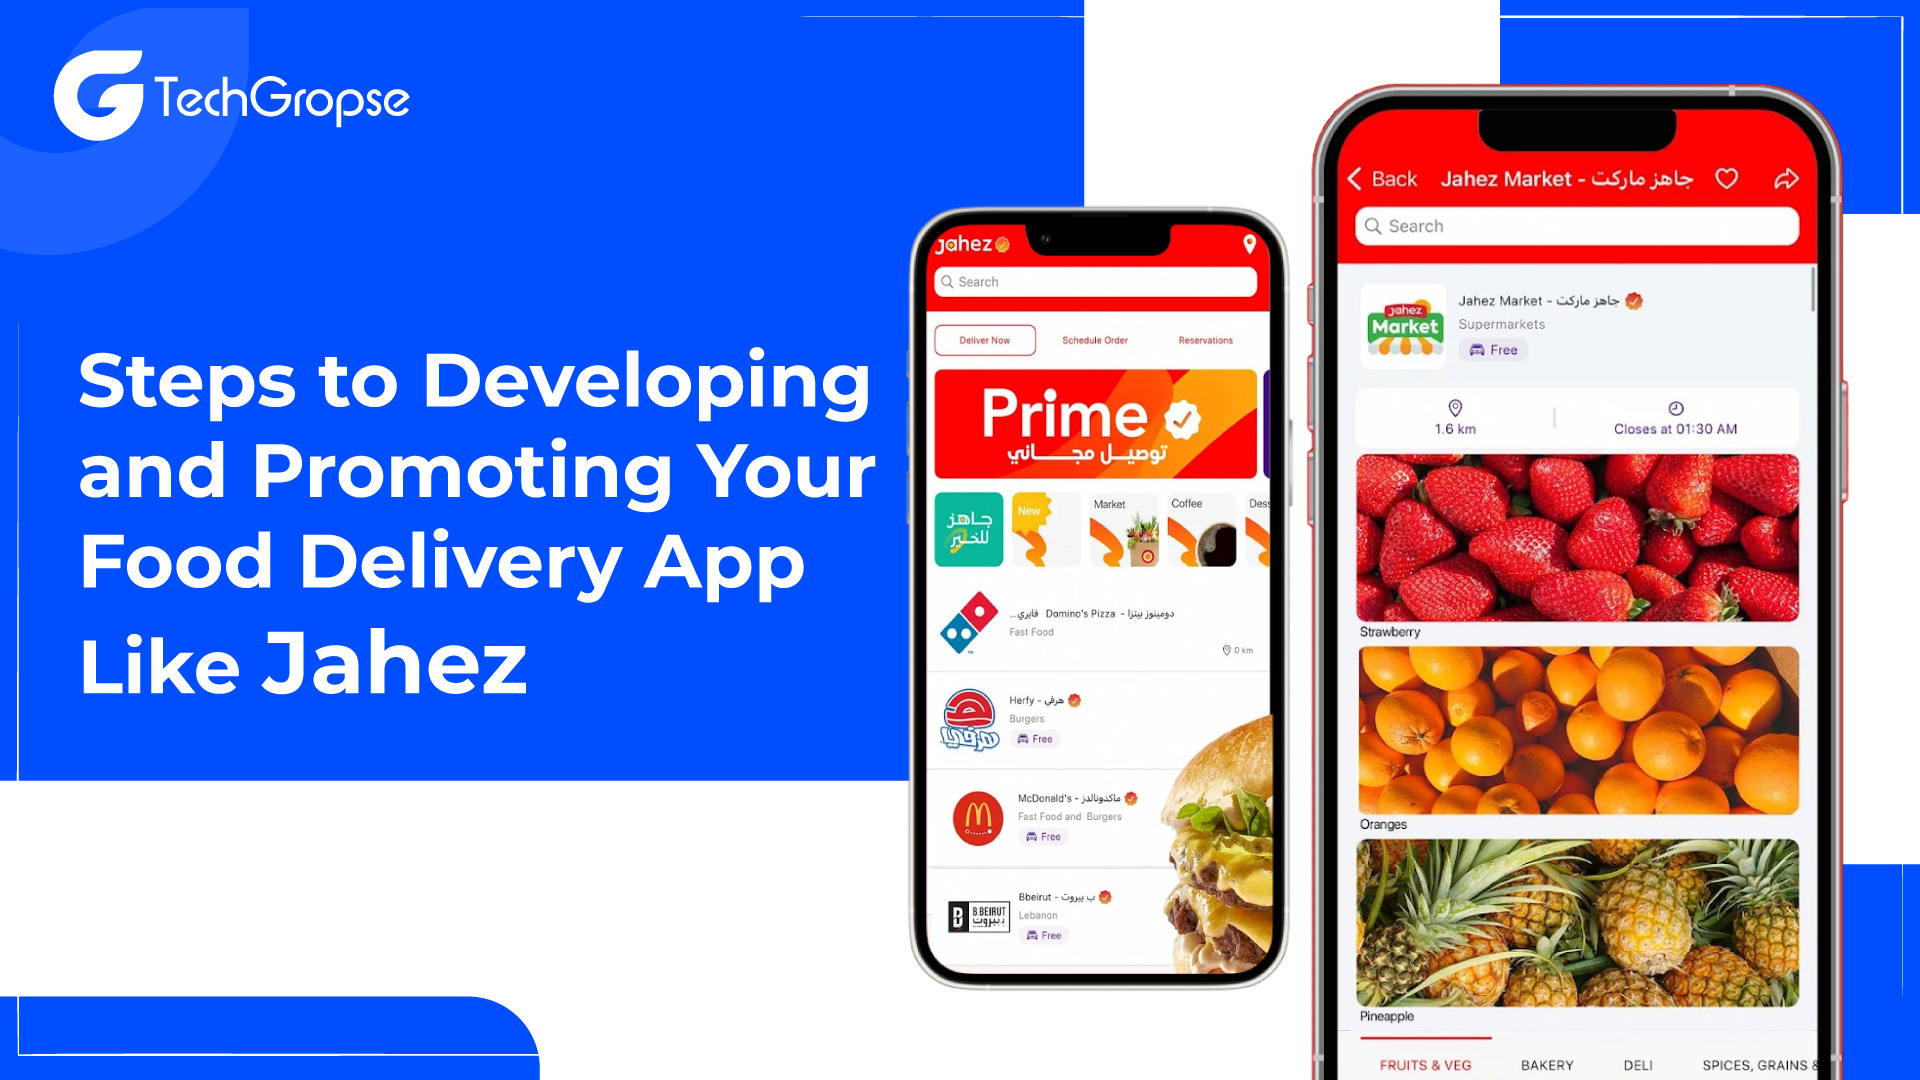 Steps to Developing and Promoting Your Food Delivery App Like Jahez